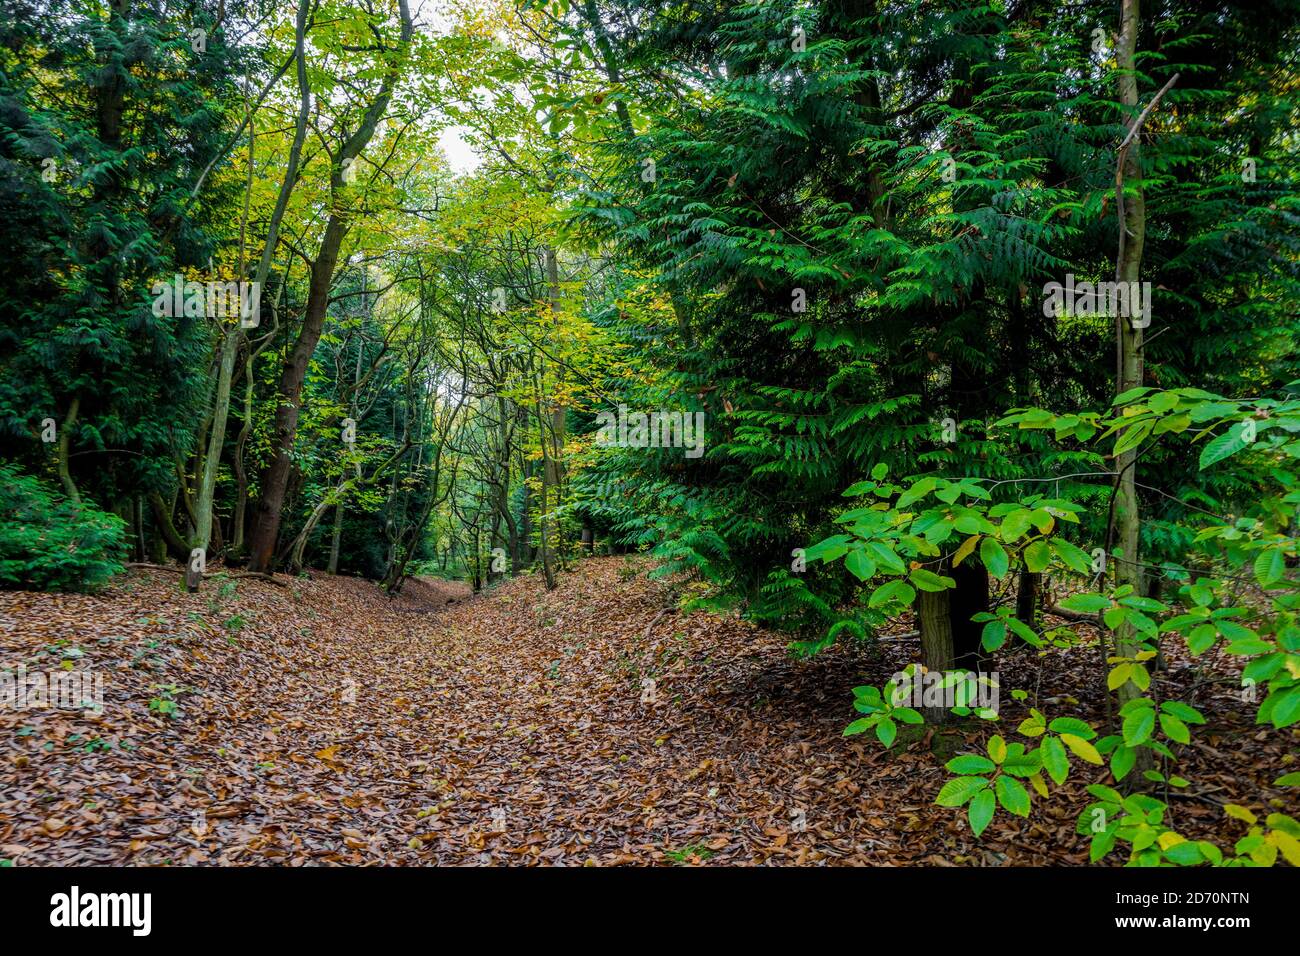 Typical mixed woodland in Sherwood Forest, conifer and deciduous trees. Stock Photo